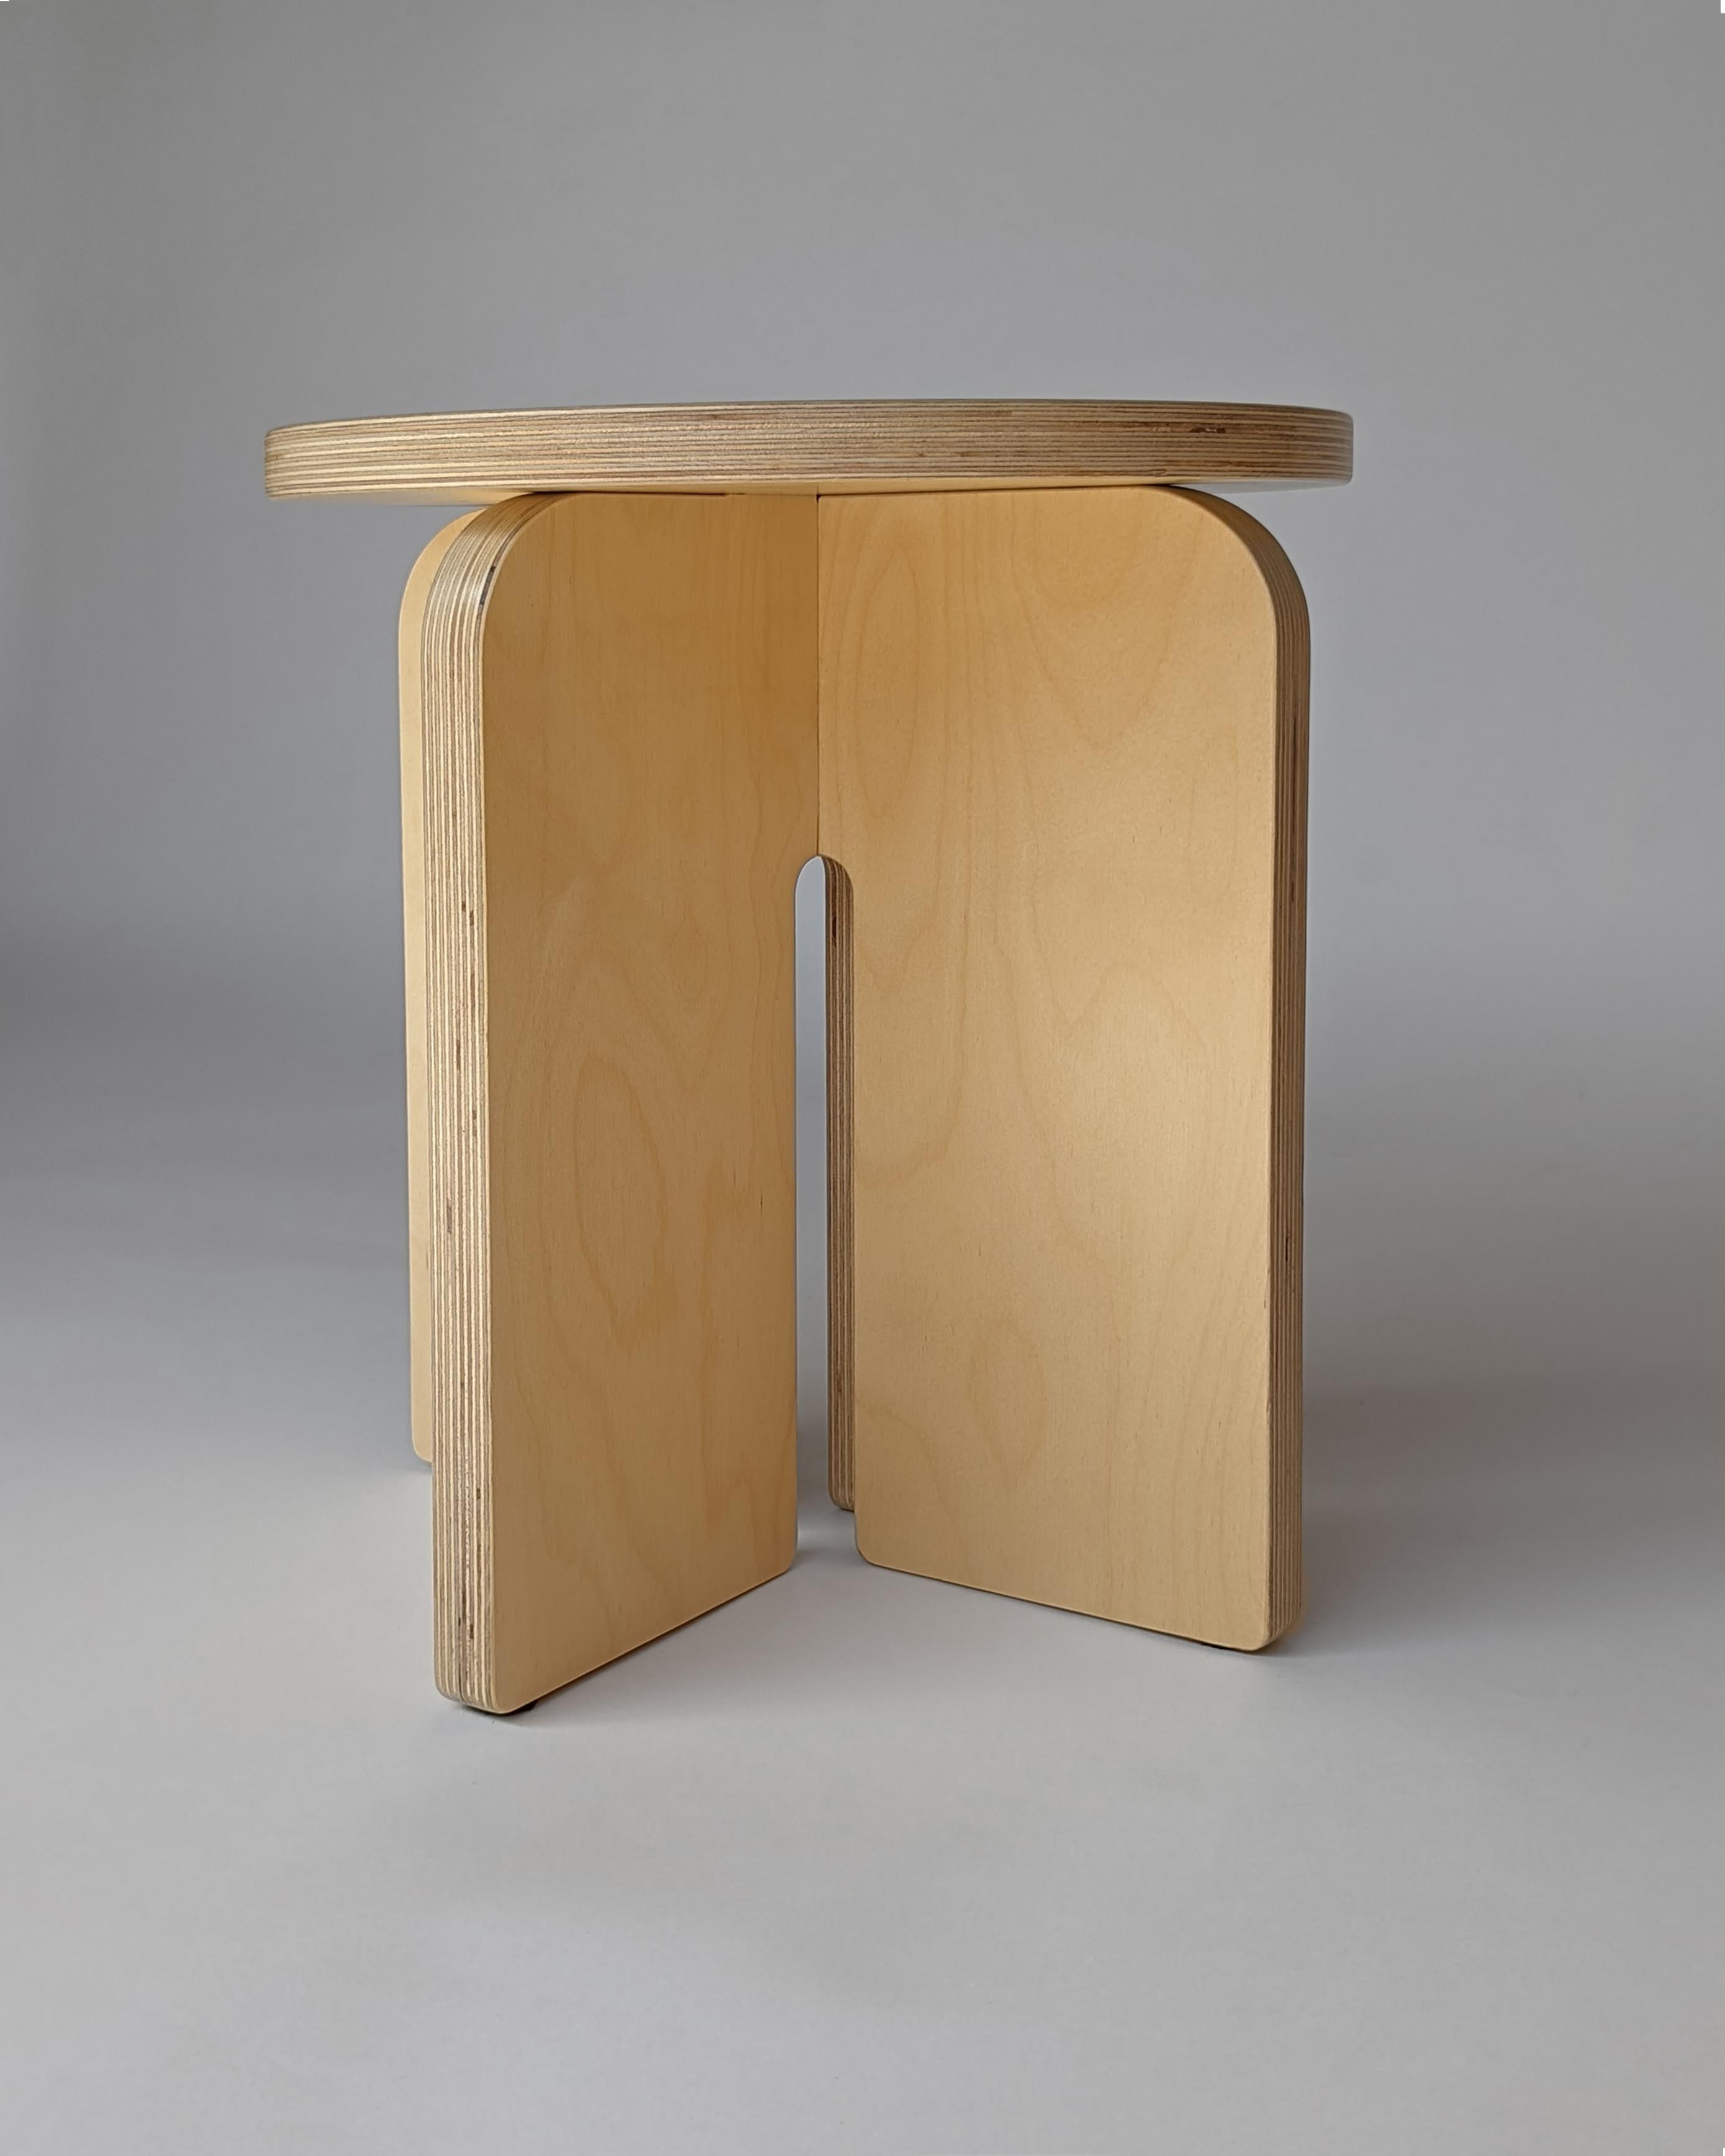 The Button stool is made from high quality Baltic birch plywood. It has a slightly warm, clear satin finish on the light natural wood that ages beautifully with time. The Button Stool has a round top, curved legs, with eased edges all around for an